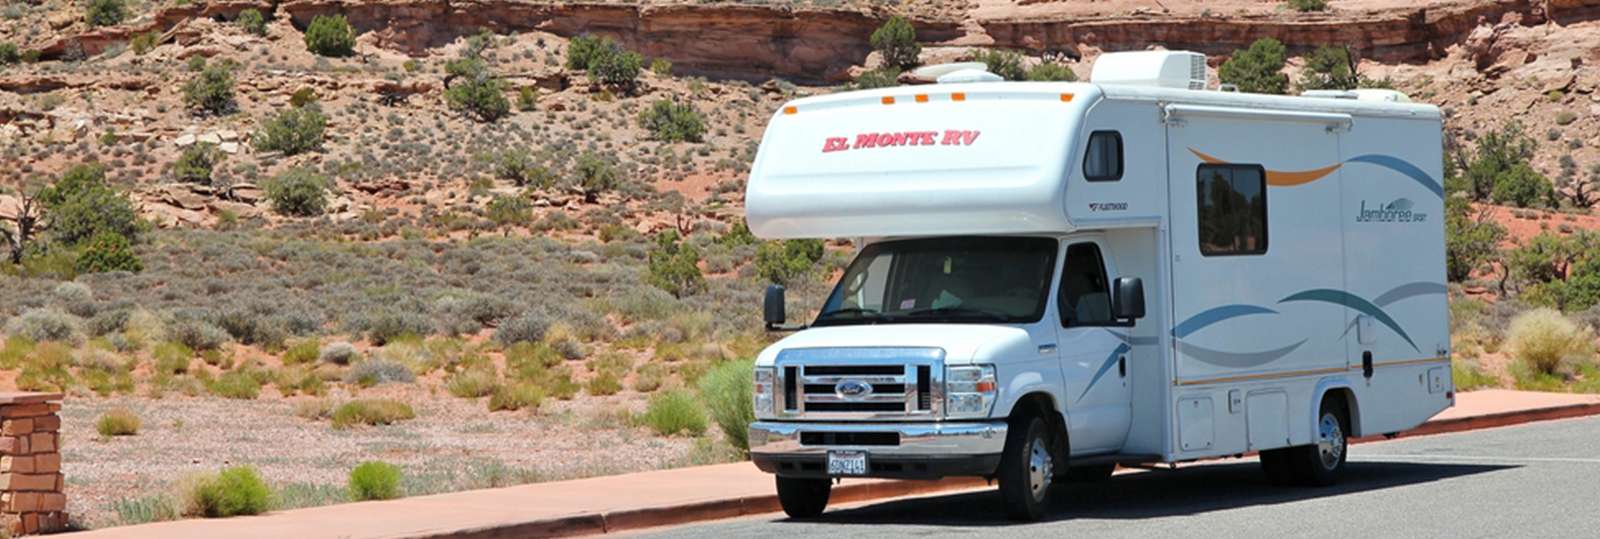 RV AND TRAVEL TRAILER INSURANCE